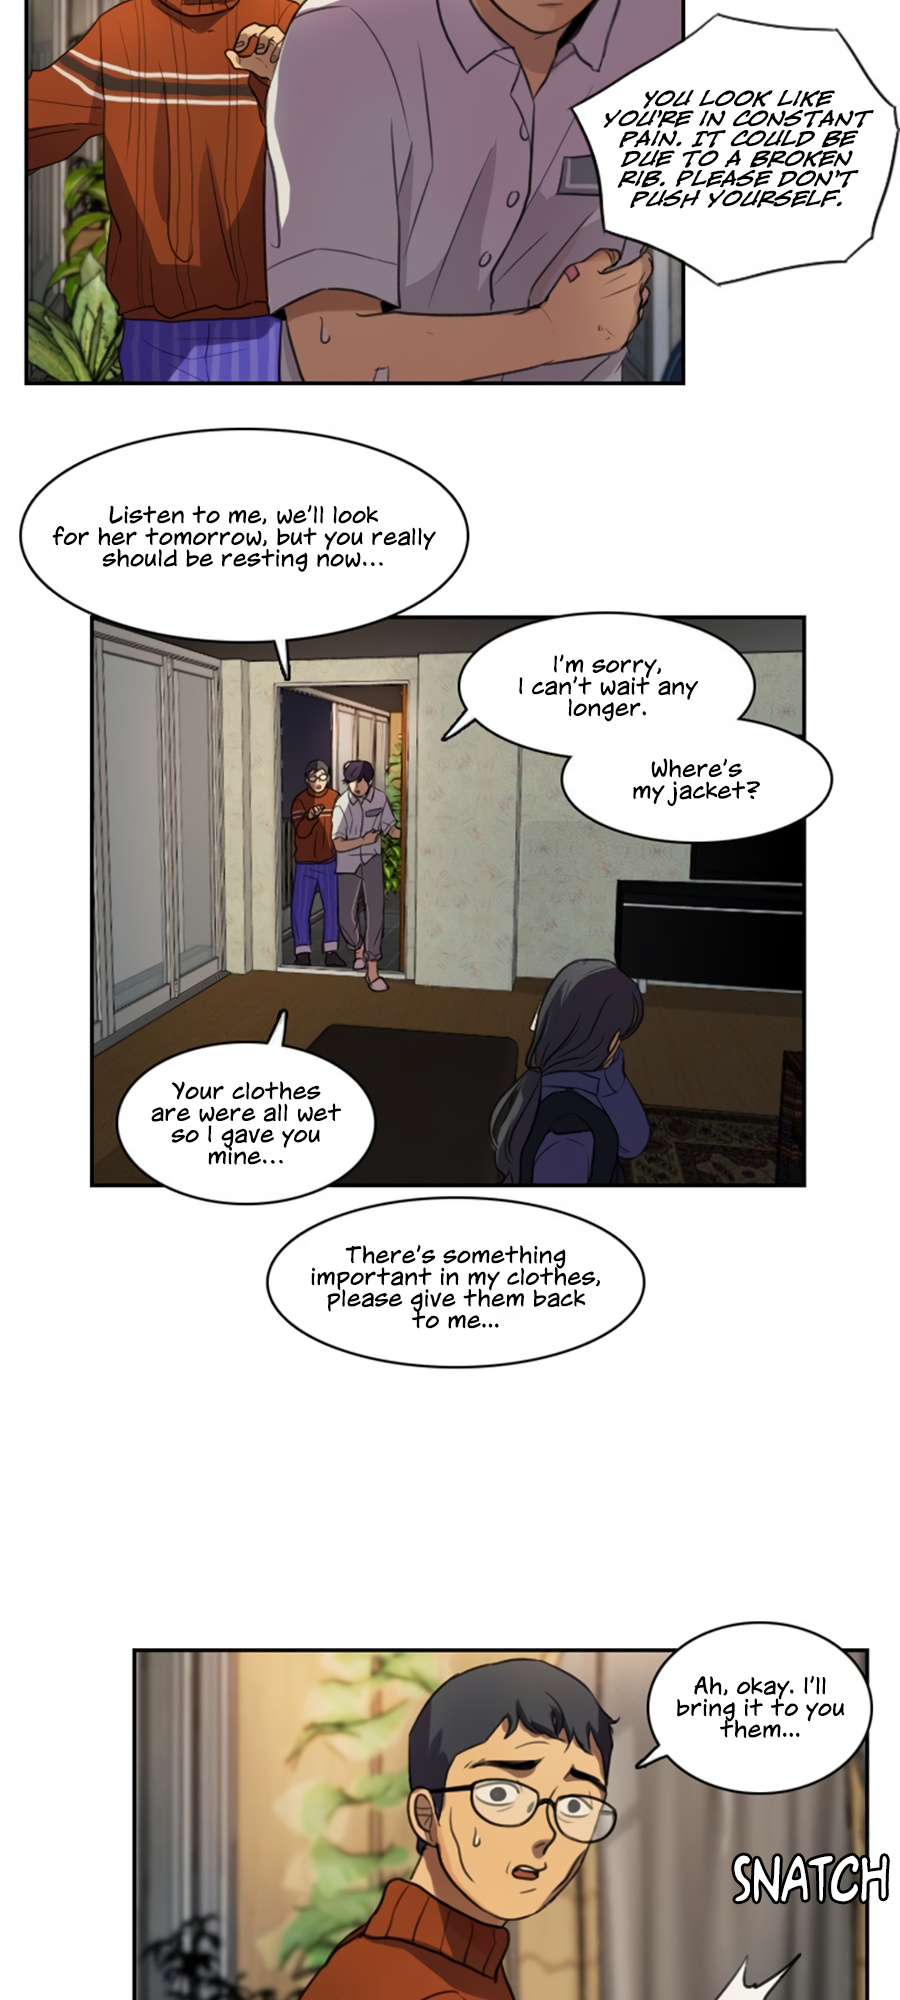 Infection Zone - Page 4